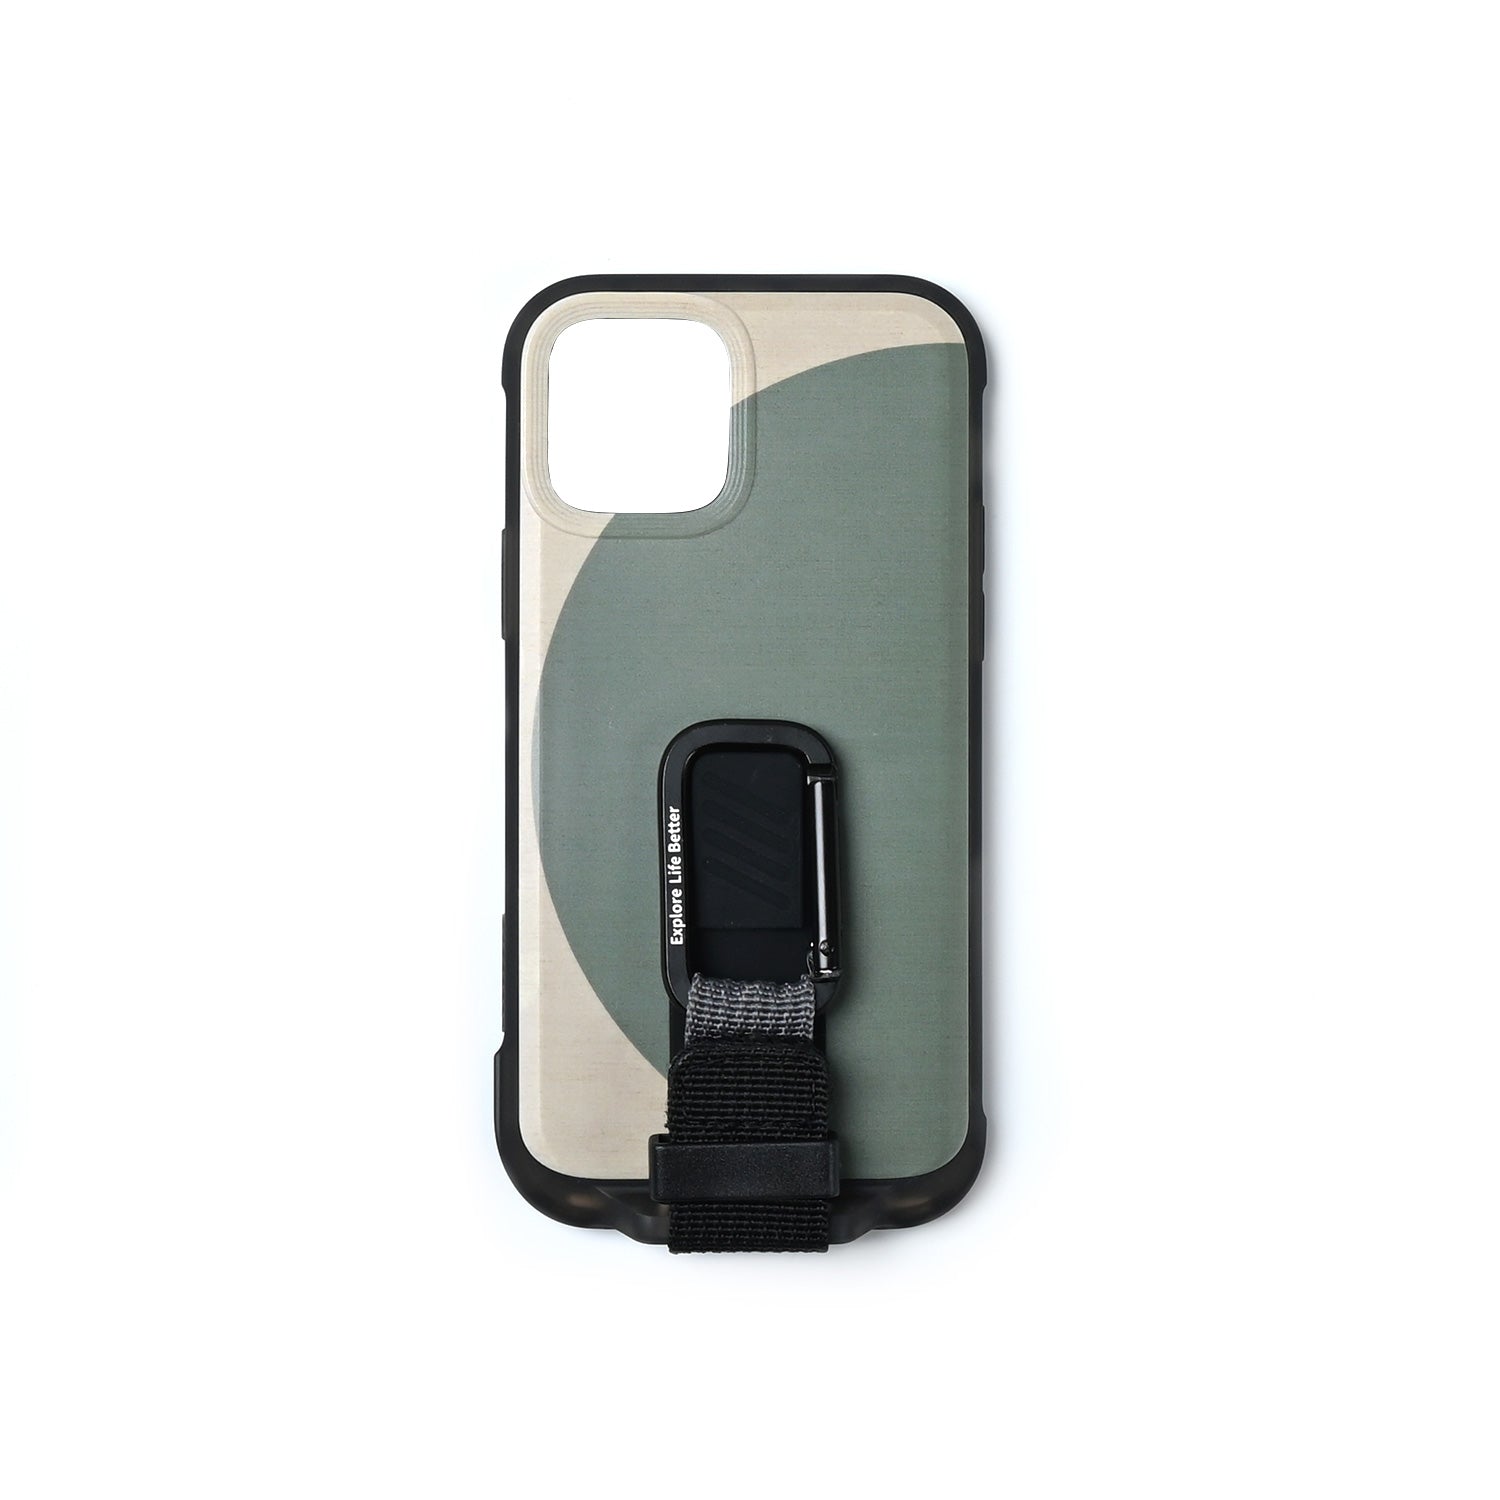 Wander Case for iPhone 12 Series - Black